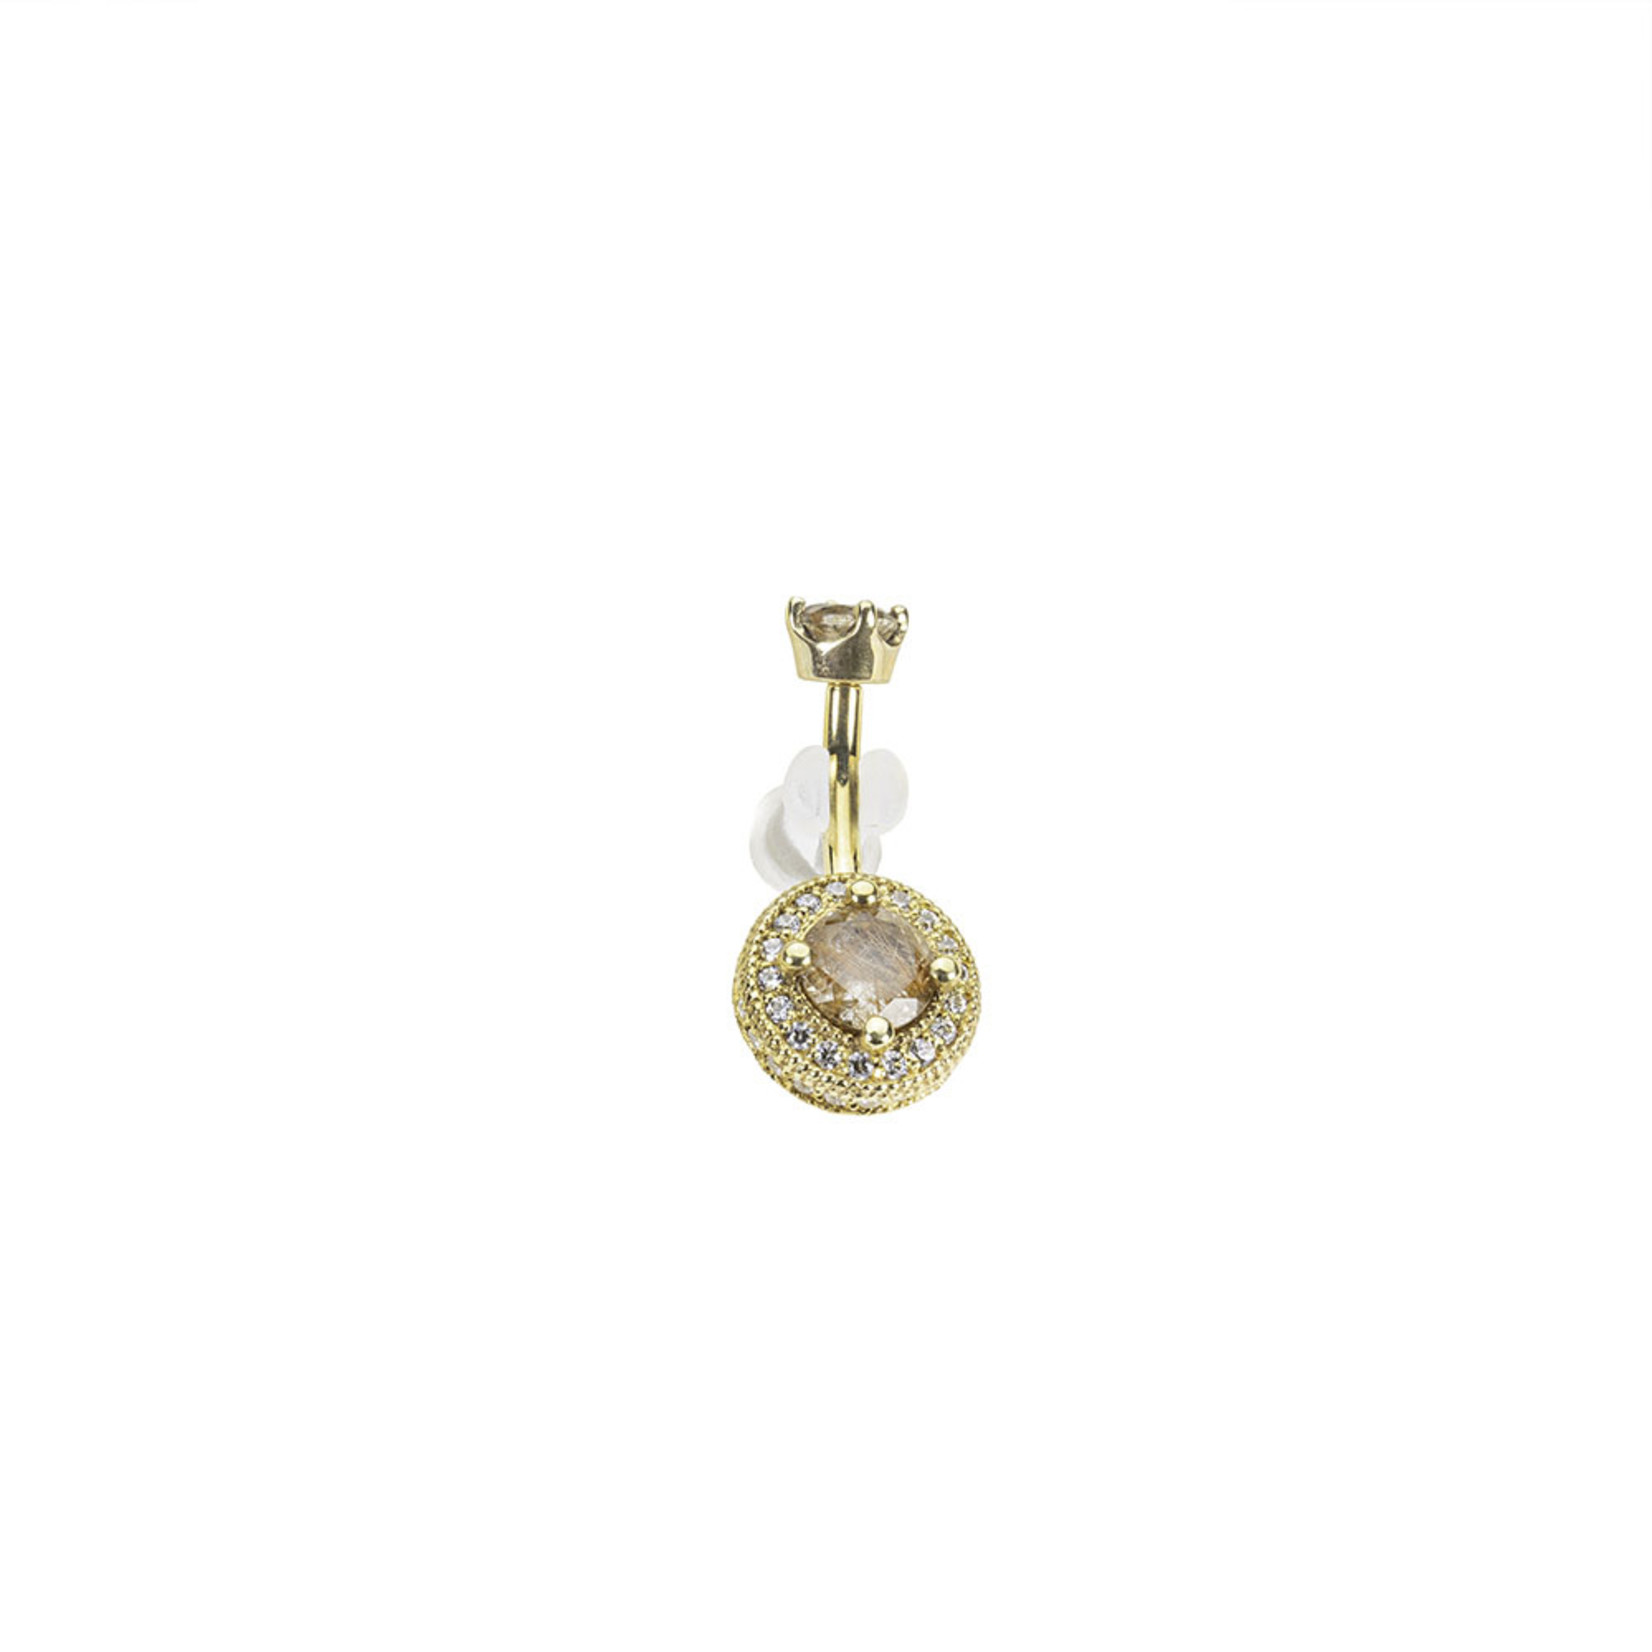 BVLA BVLA 14g 3/8 yellow gold "Halo" navel curve with 4.0 prong set rutilated quartz top and a 5.0 rutilated quartz center surrounded by 1.25 & 1.0 CZ